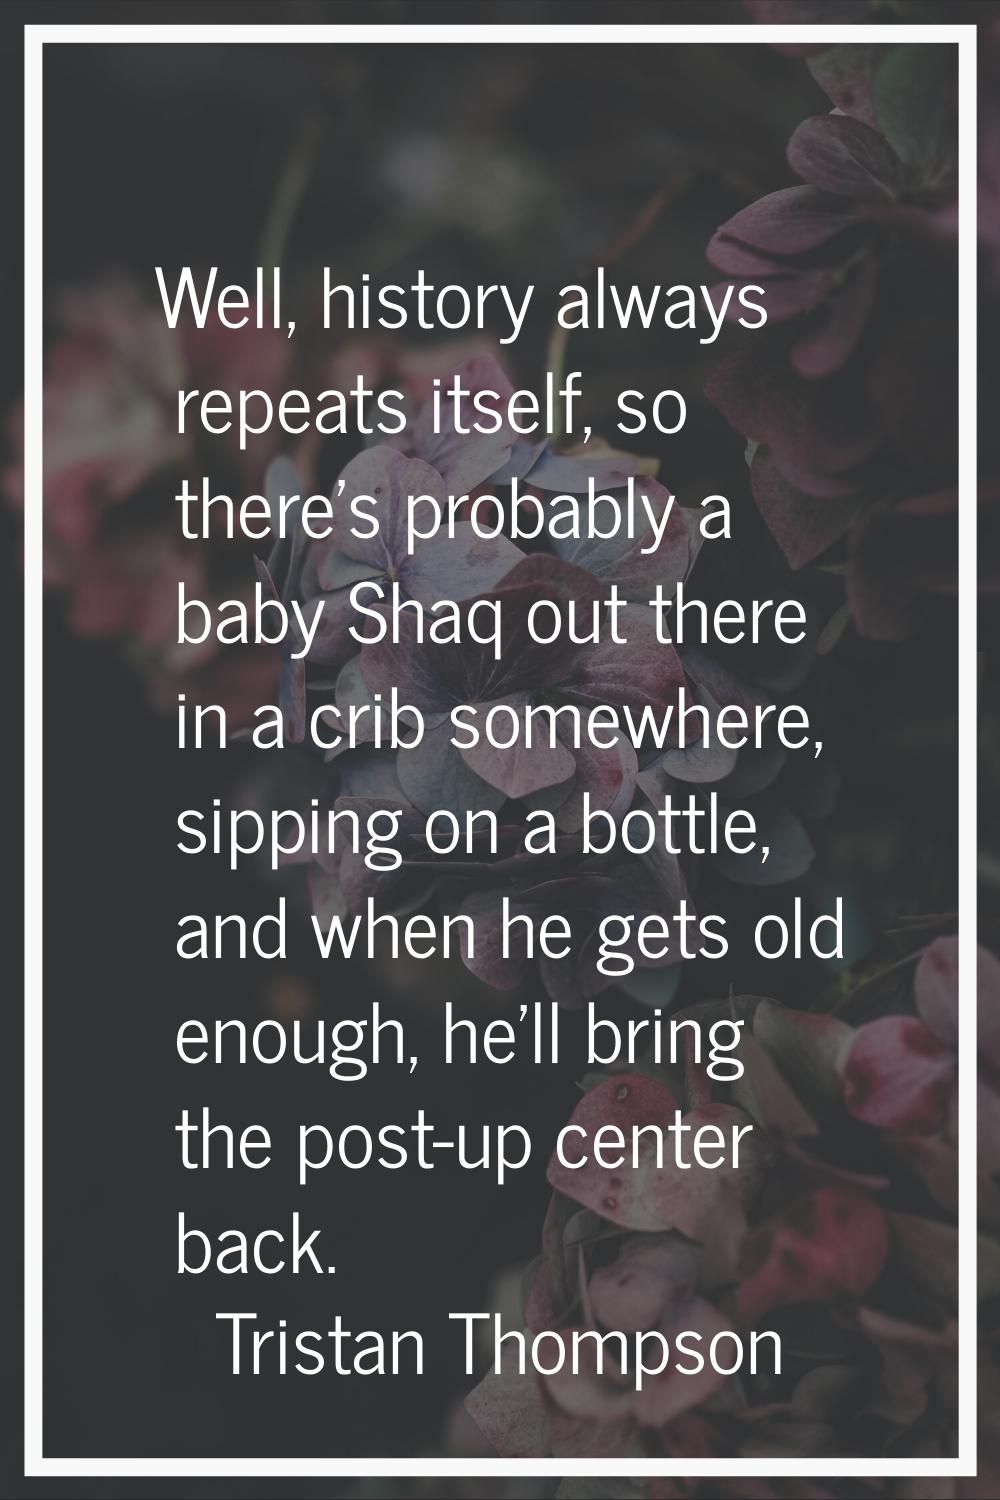 Well, history always repeats itself, so there's probably a baby Shaq out there in a crib somewhere,